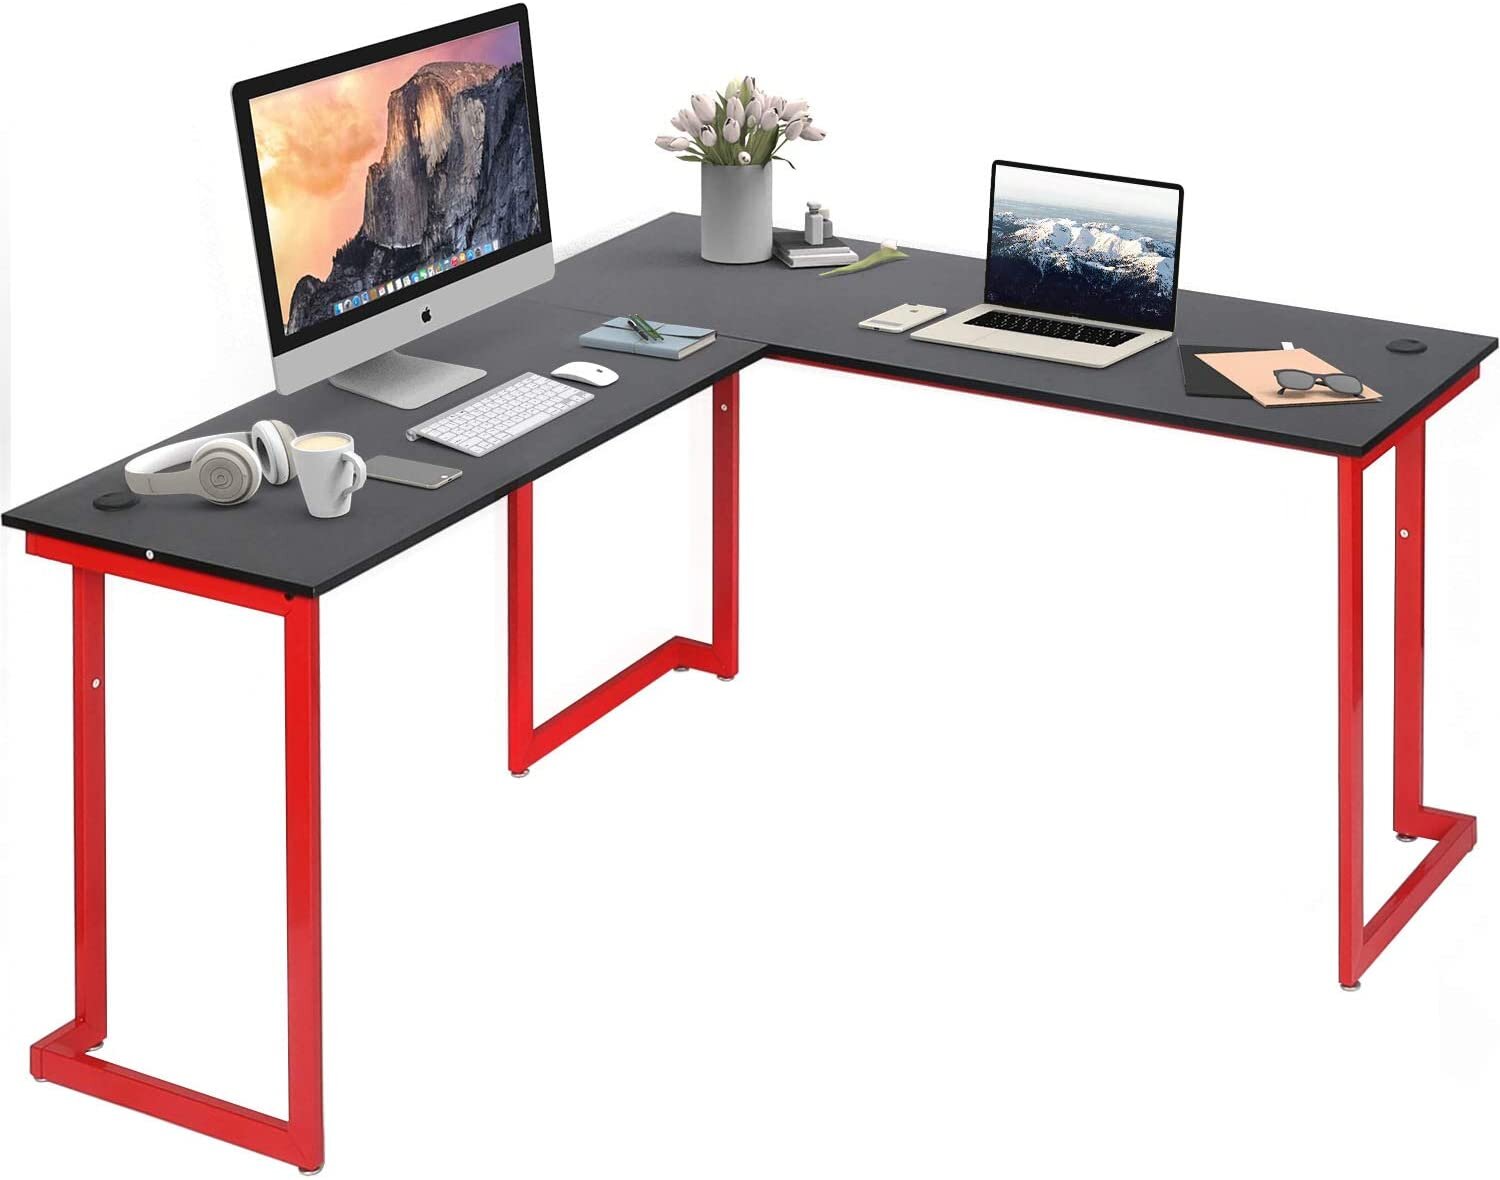 L-Shaped Corner Computer Desk Laptop Table for Home Office Study Writting Gaming